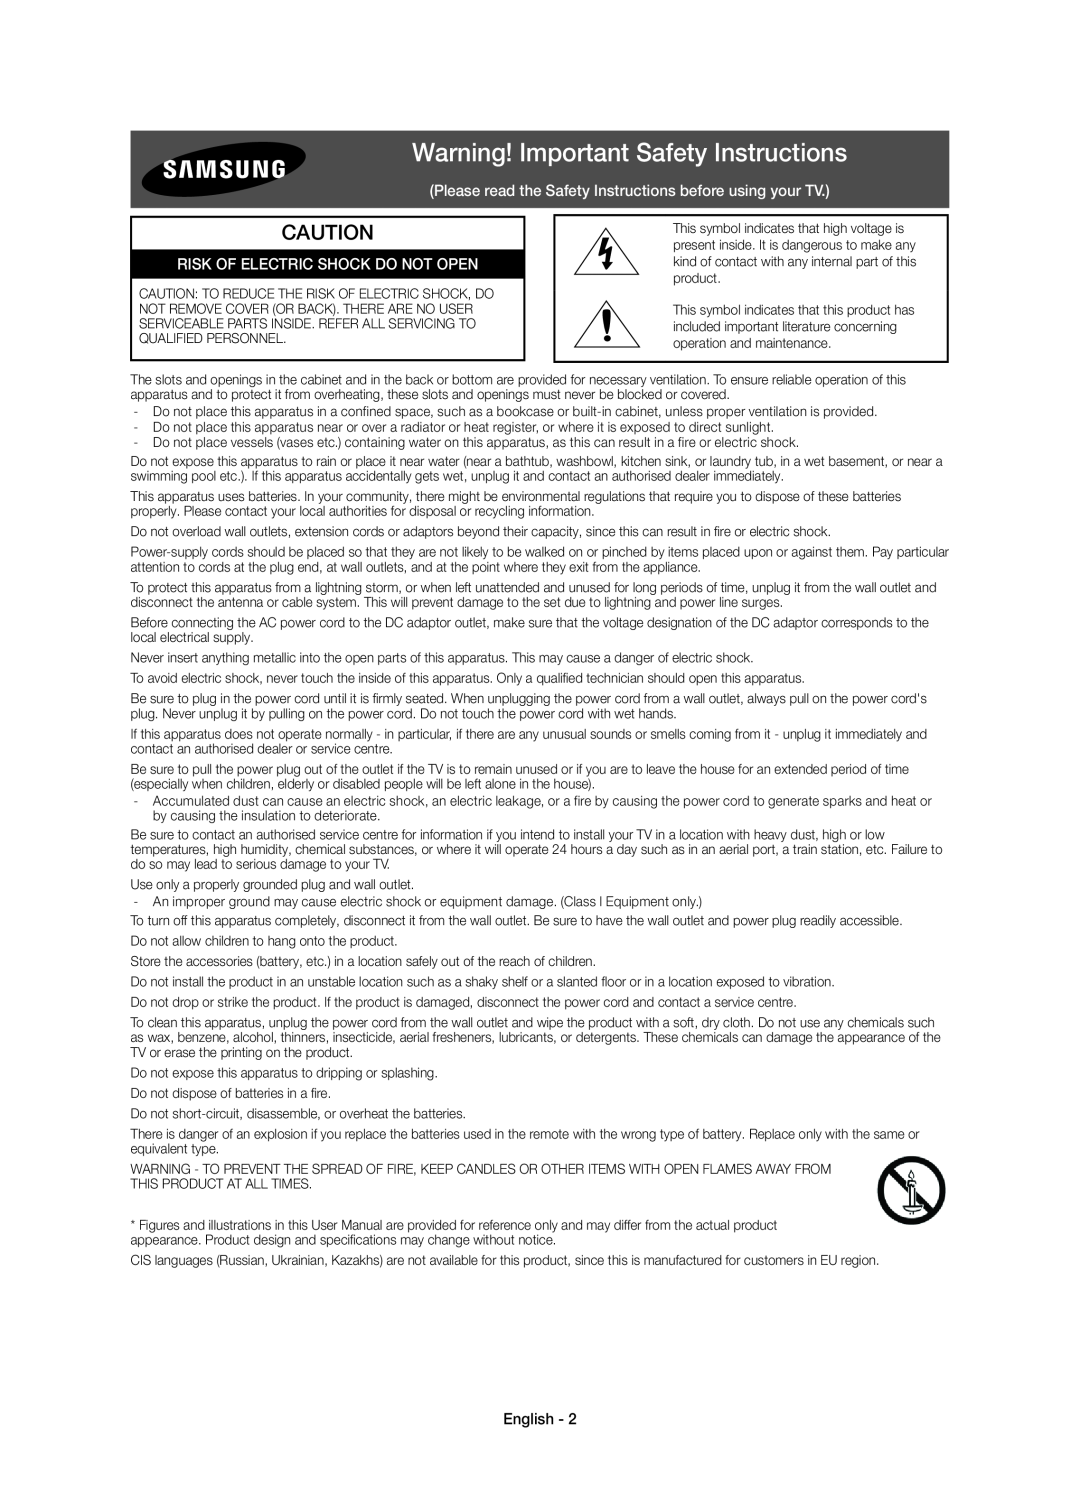 Samsung UE55JU6740SXXH Warning! Important Safety Instructions, Please read the Safety Instructions before using your TV 